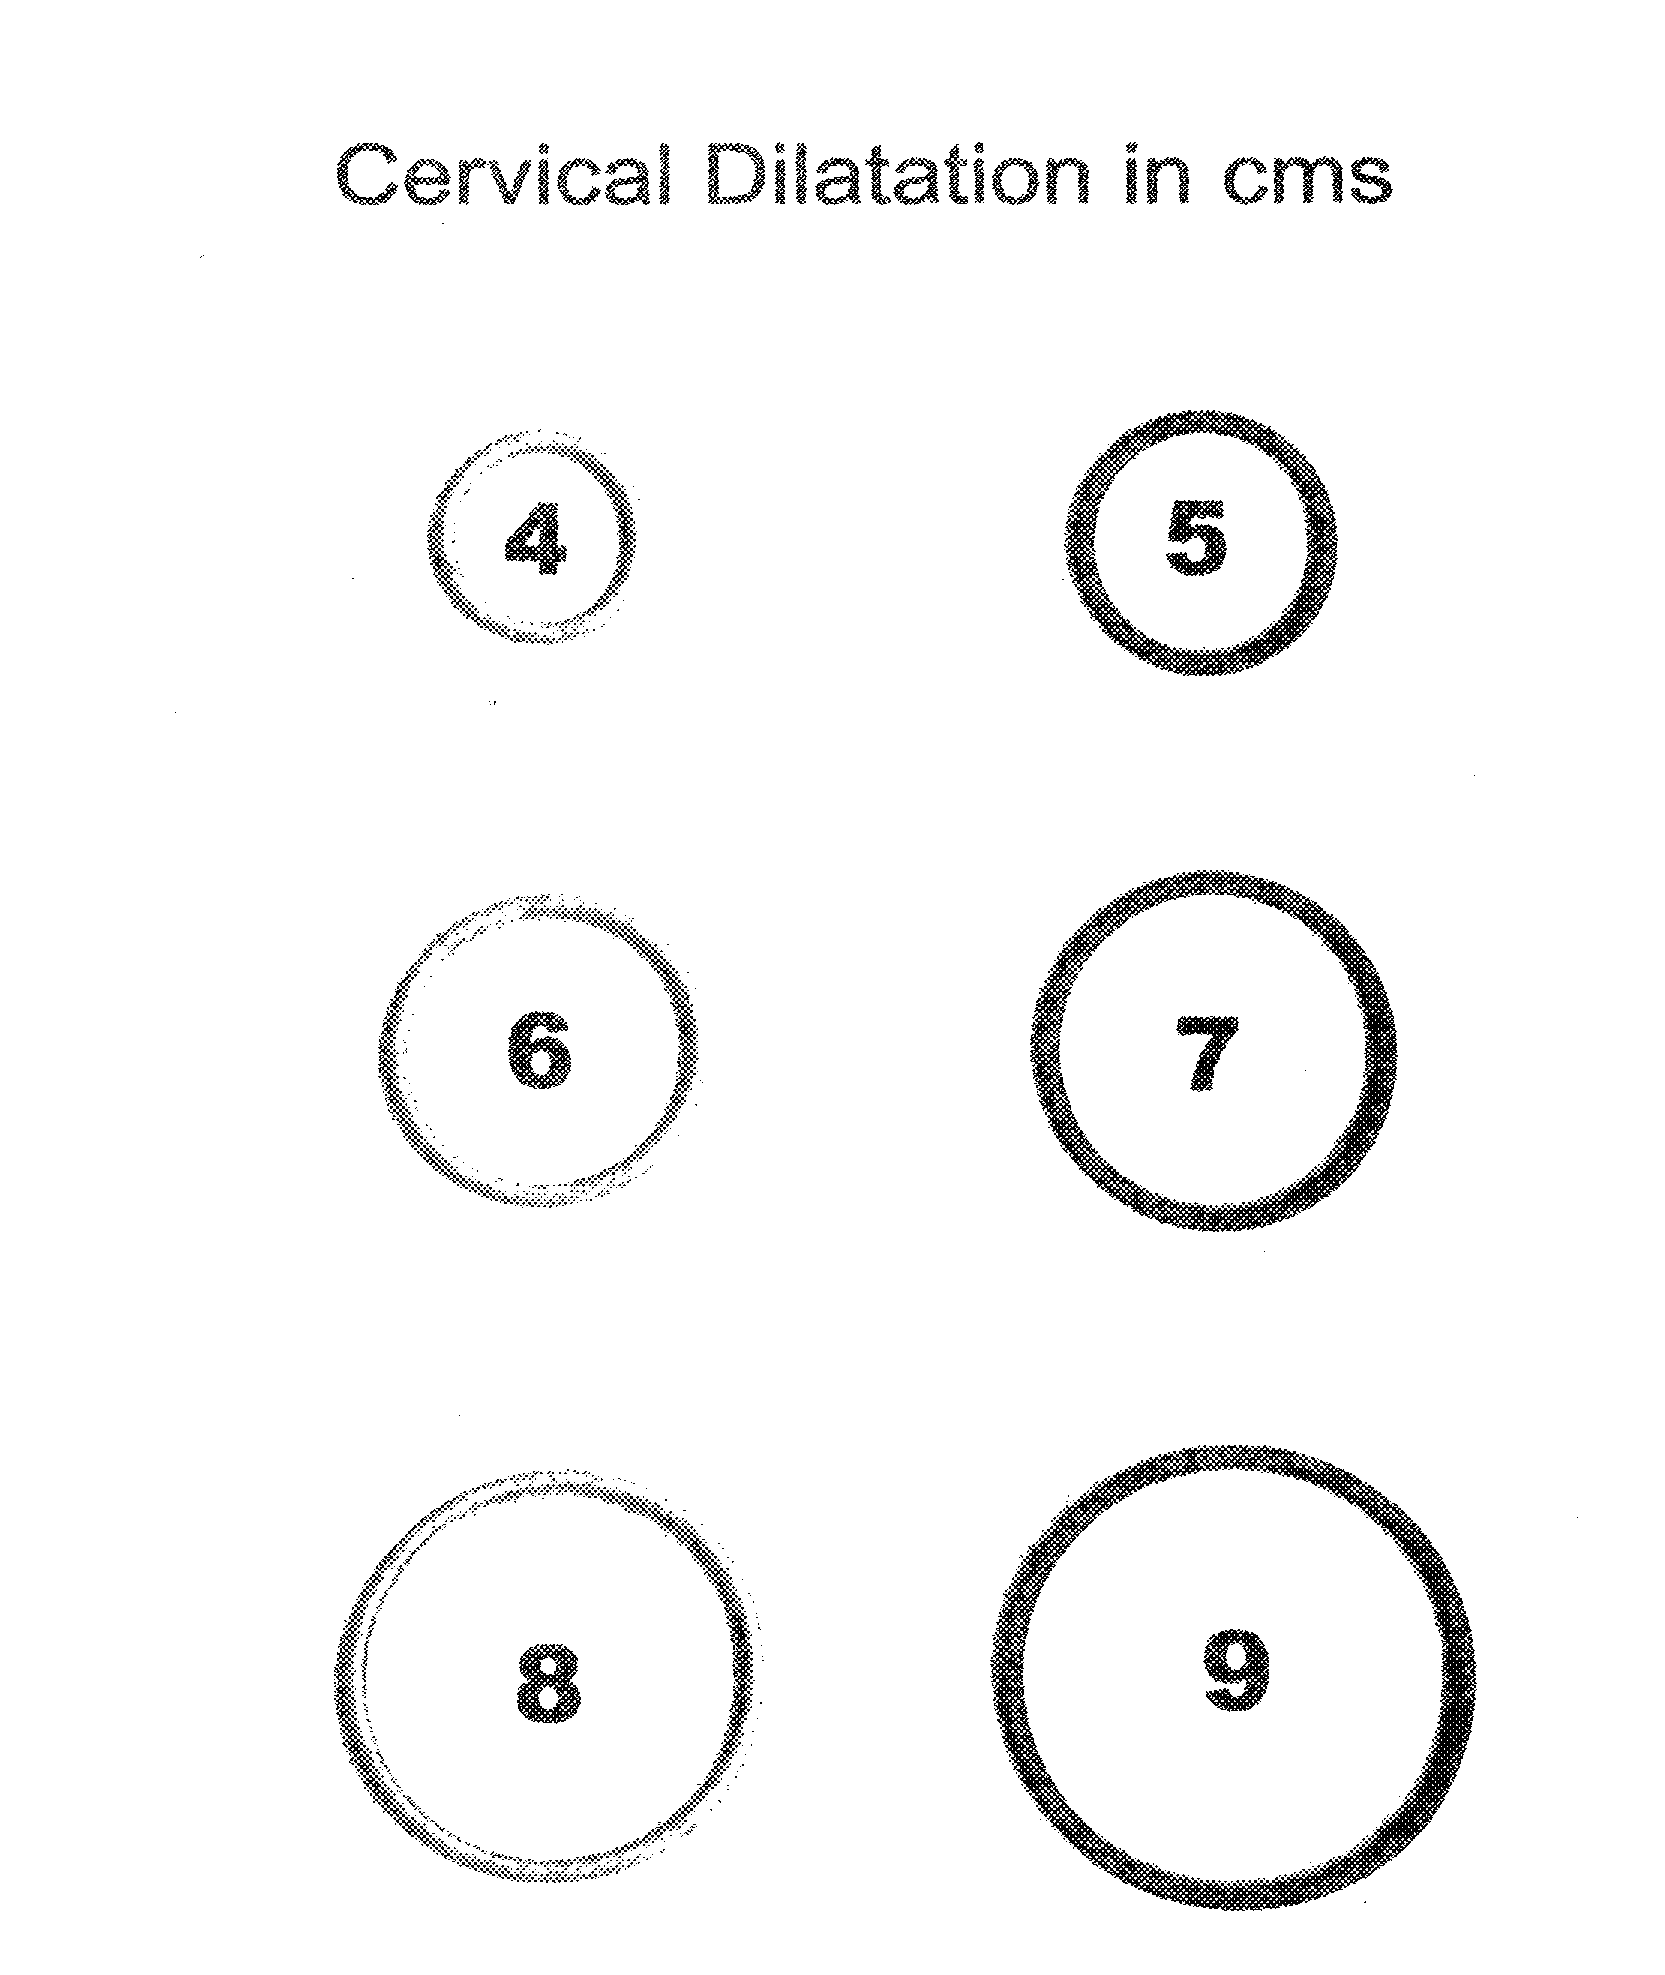 Color-coded rings for determining degree of cervical dilatation